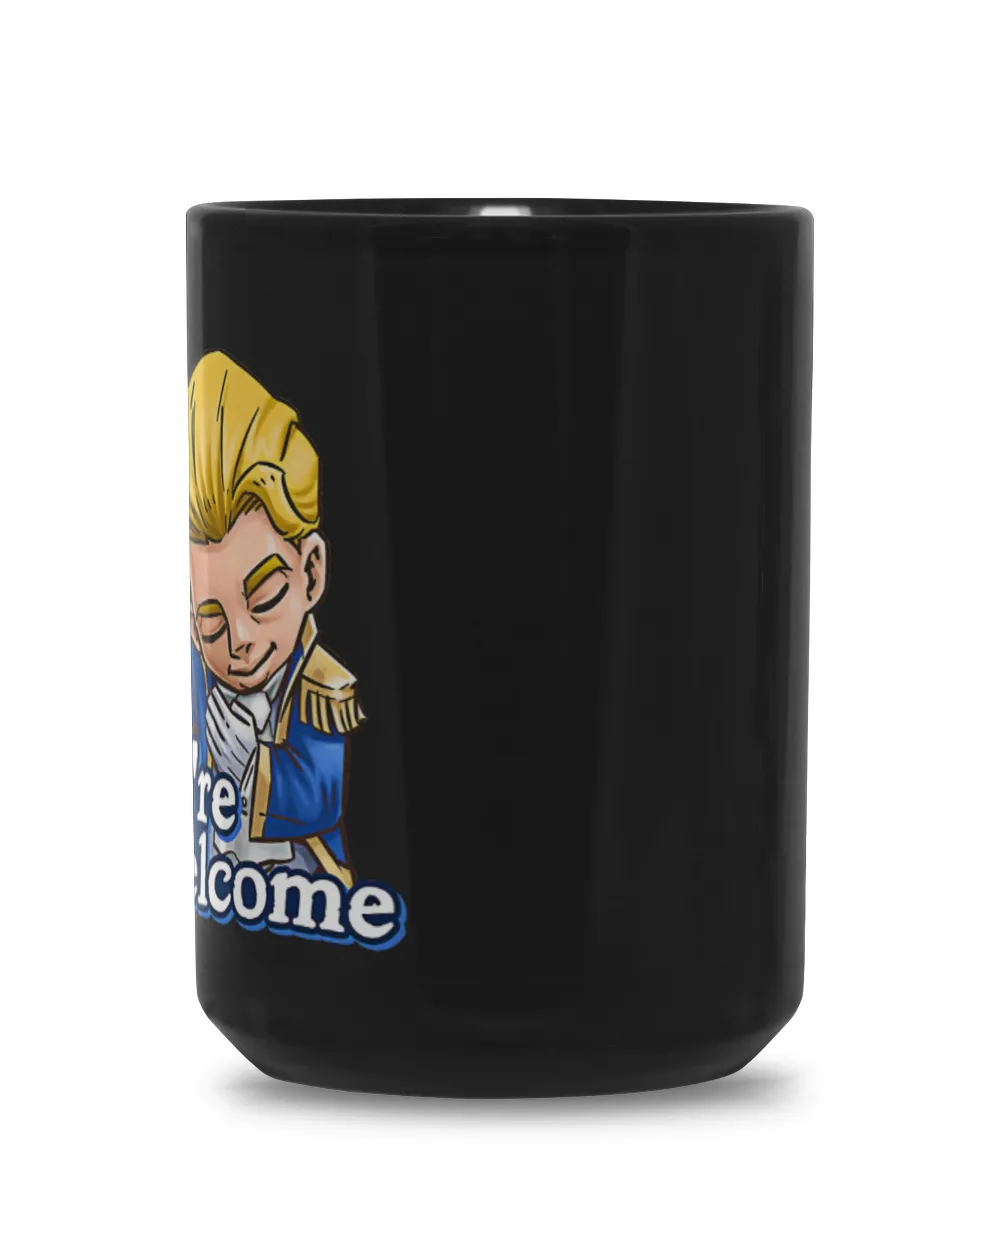 You are welcome, bitcoin style,  crypto cup,,